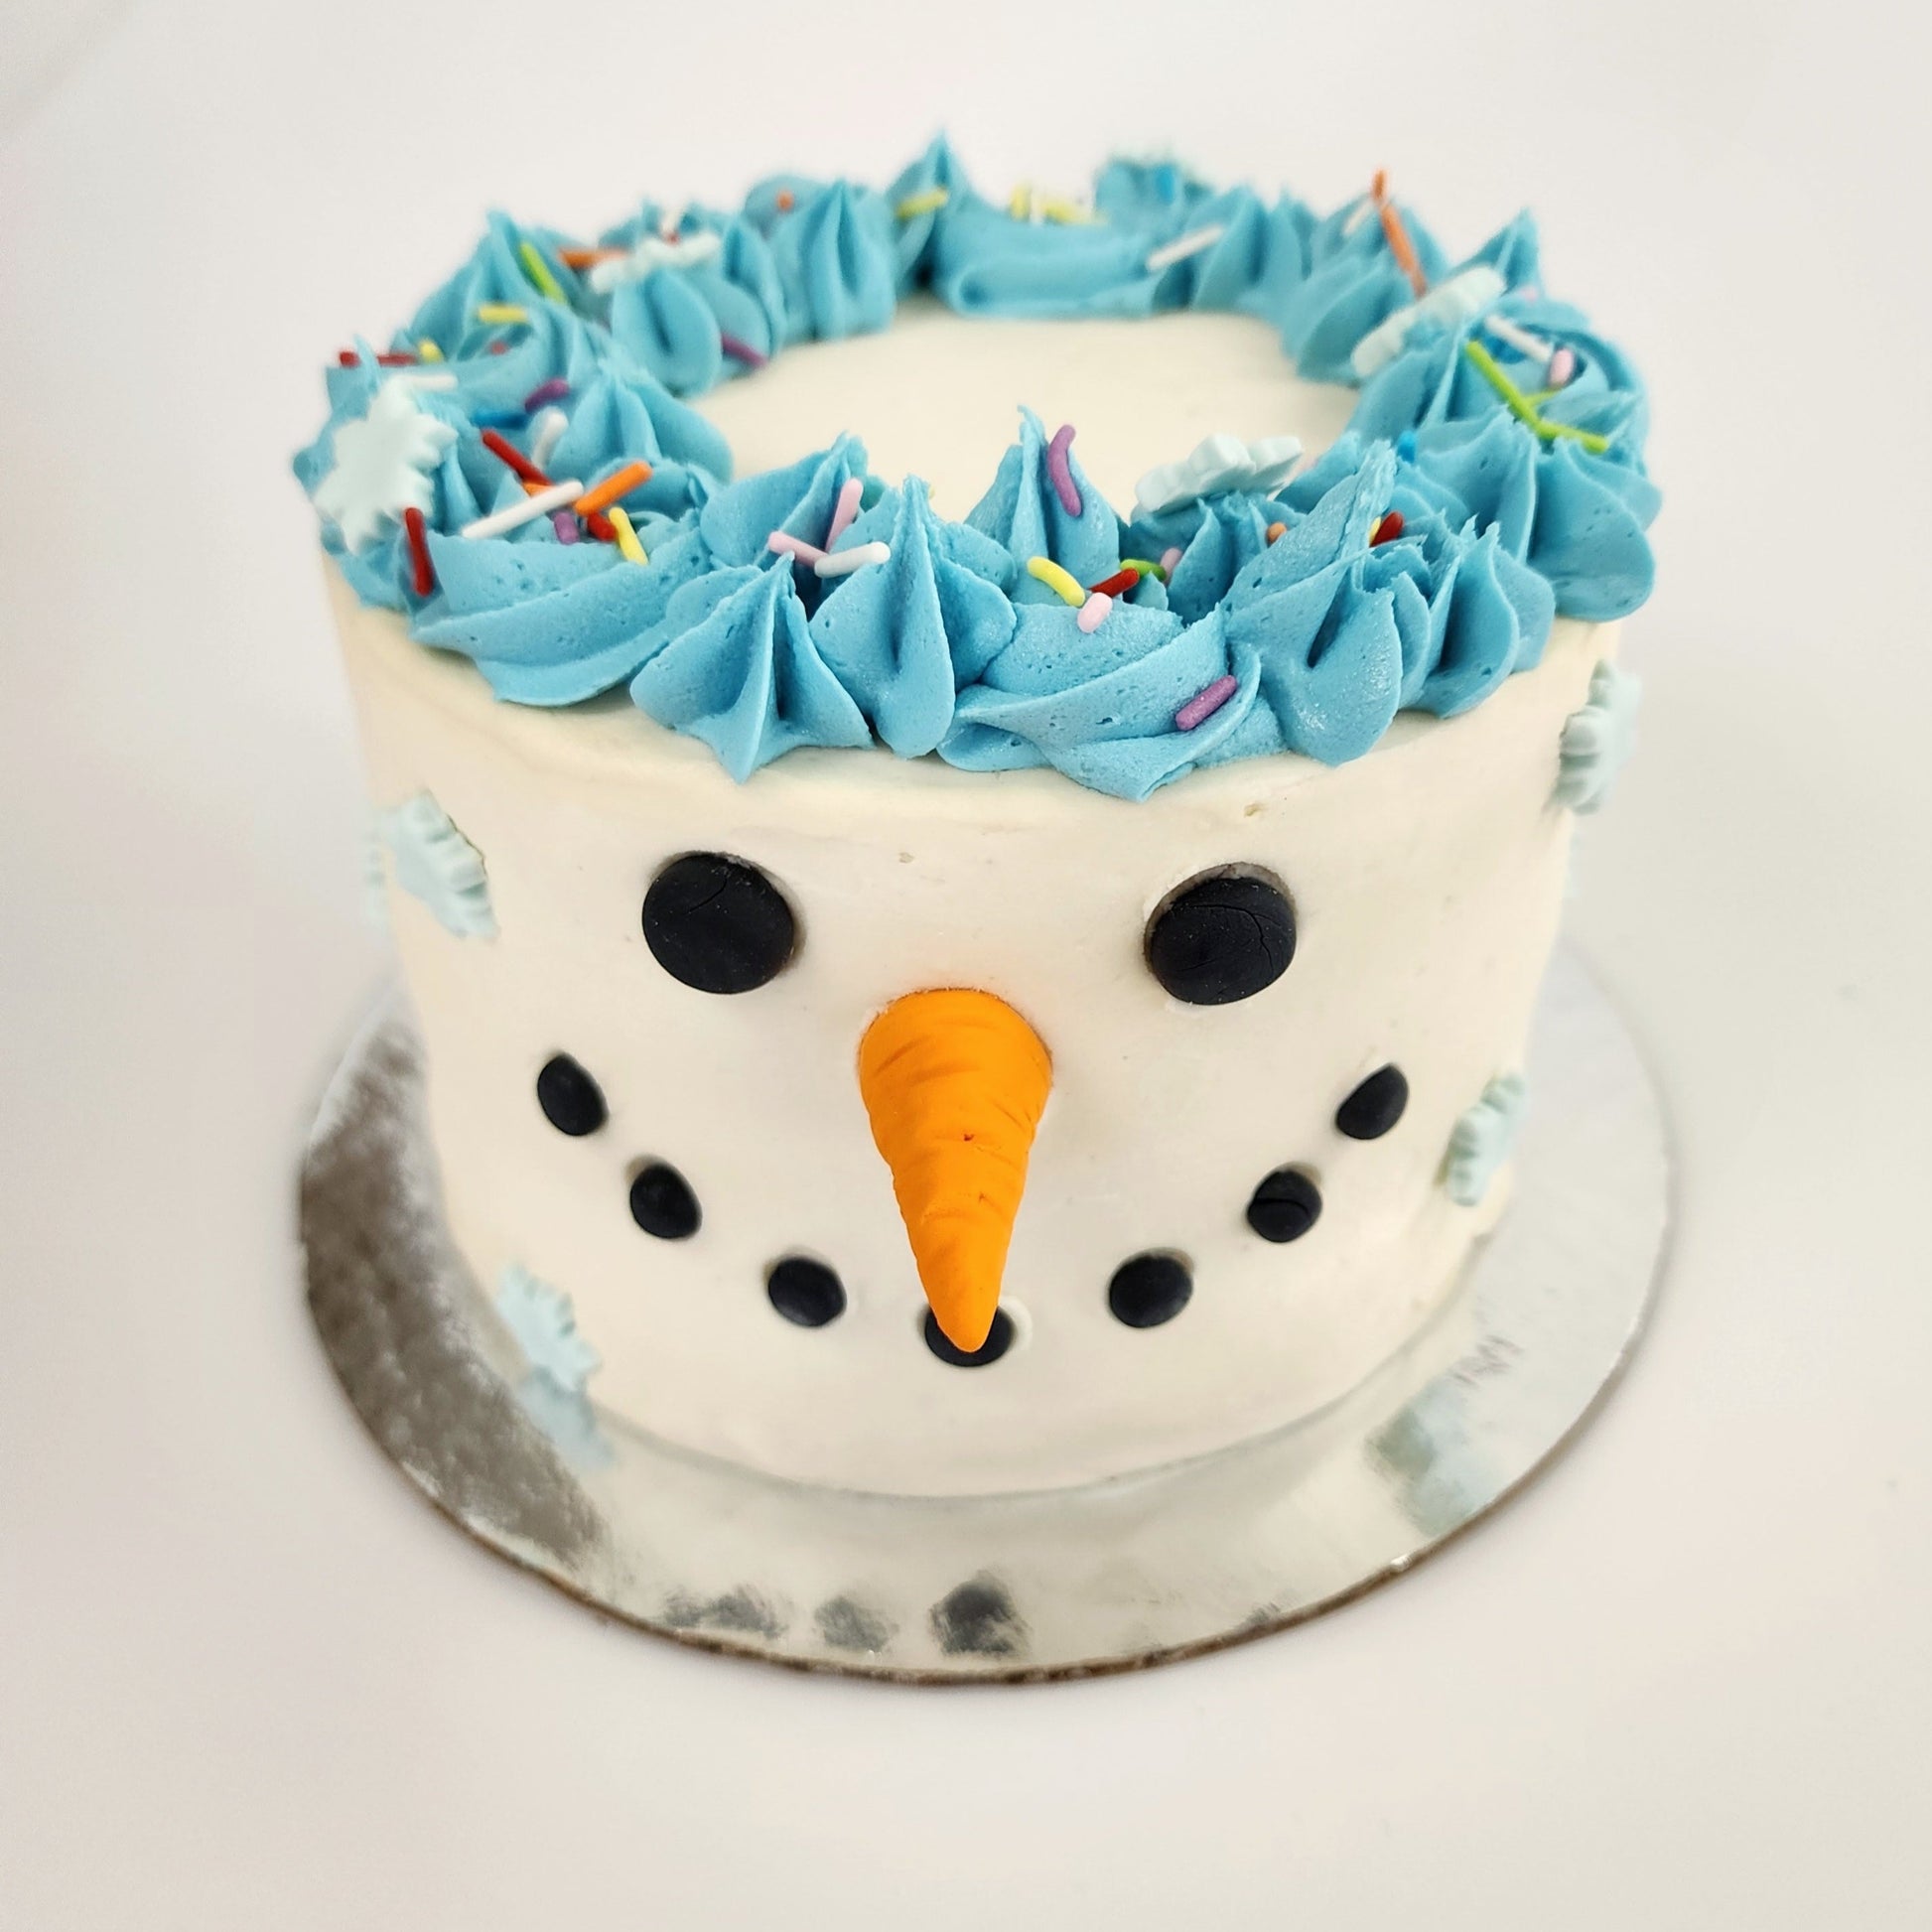 DIY cake decorating. Snowman, snowperson cake with face made out of black fondant and orange fondant nose.  Blue frosting crown topped with rainbow sprinkles and light blue snowflakes made of fondant.